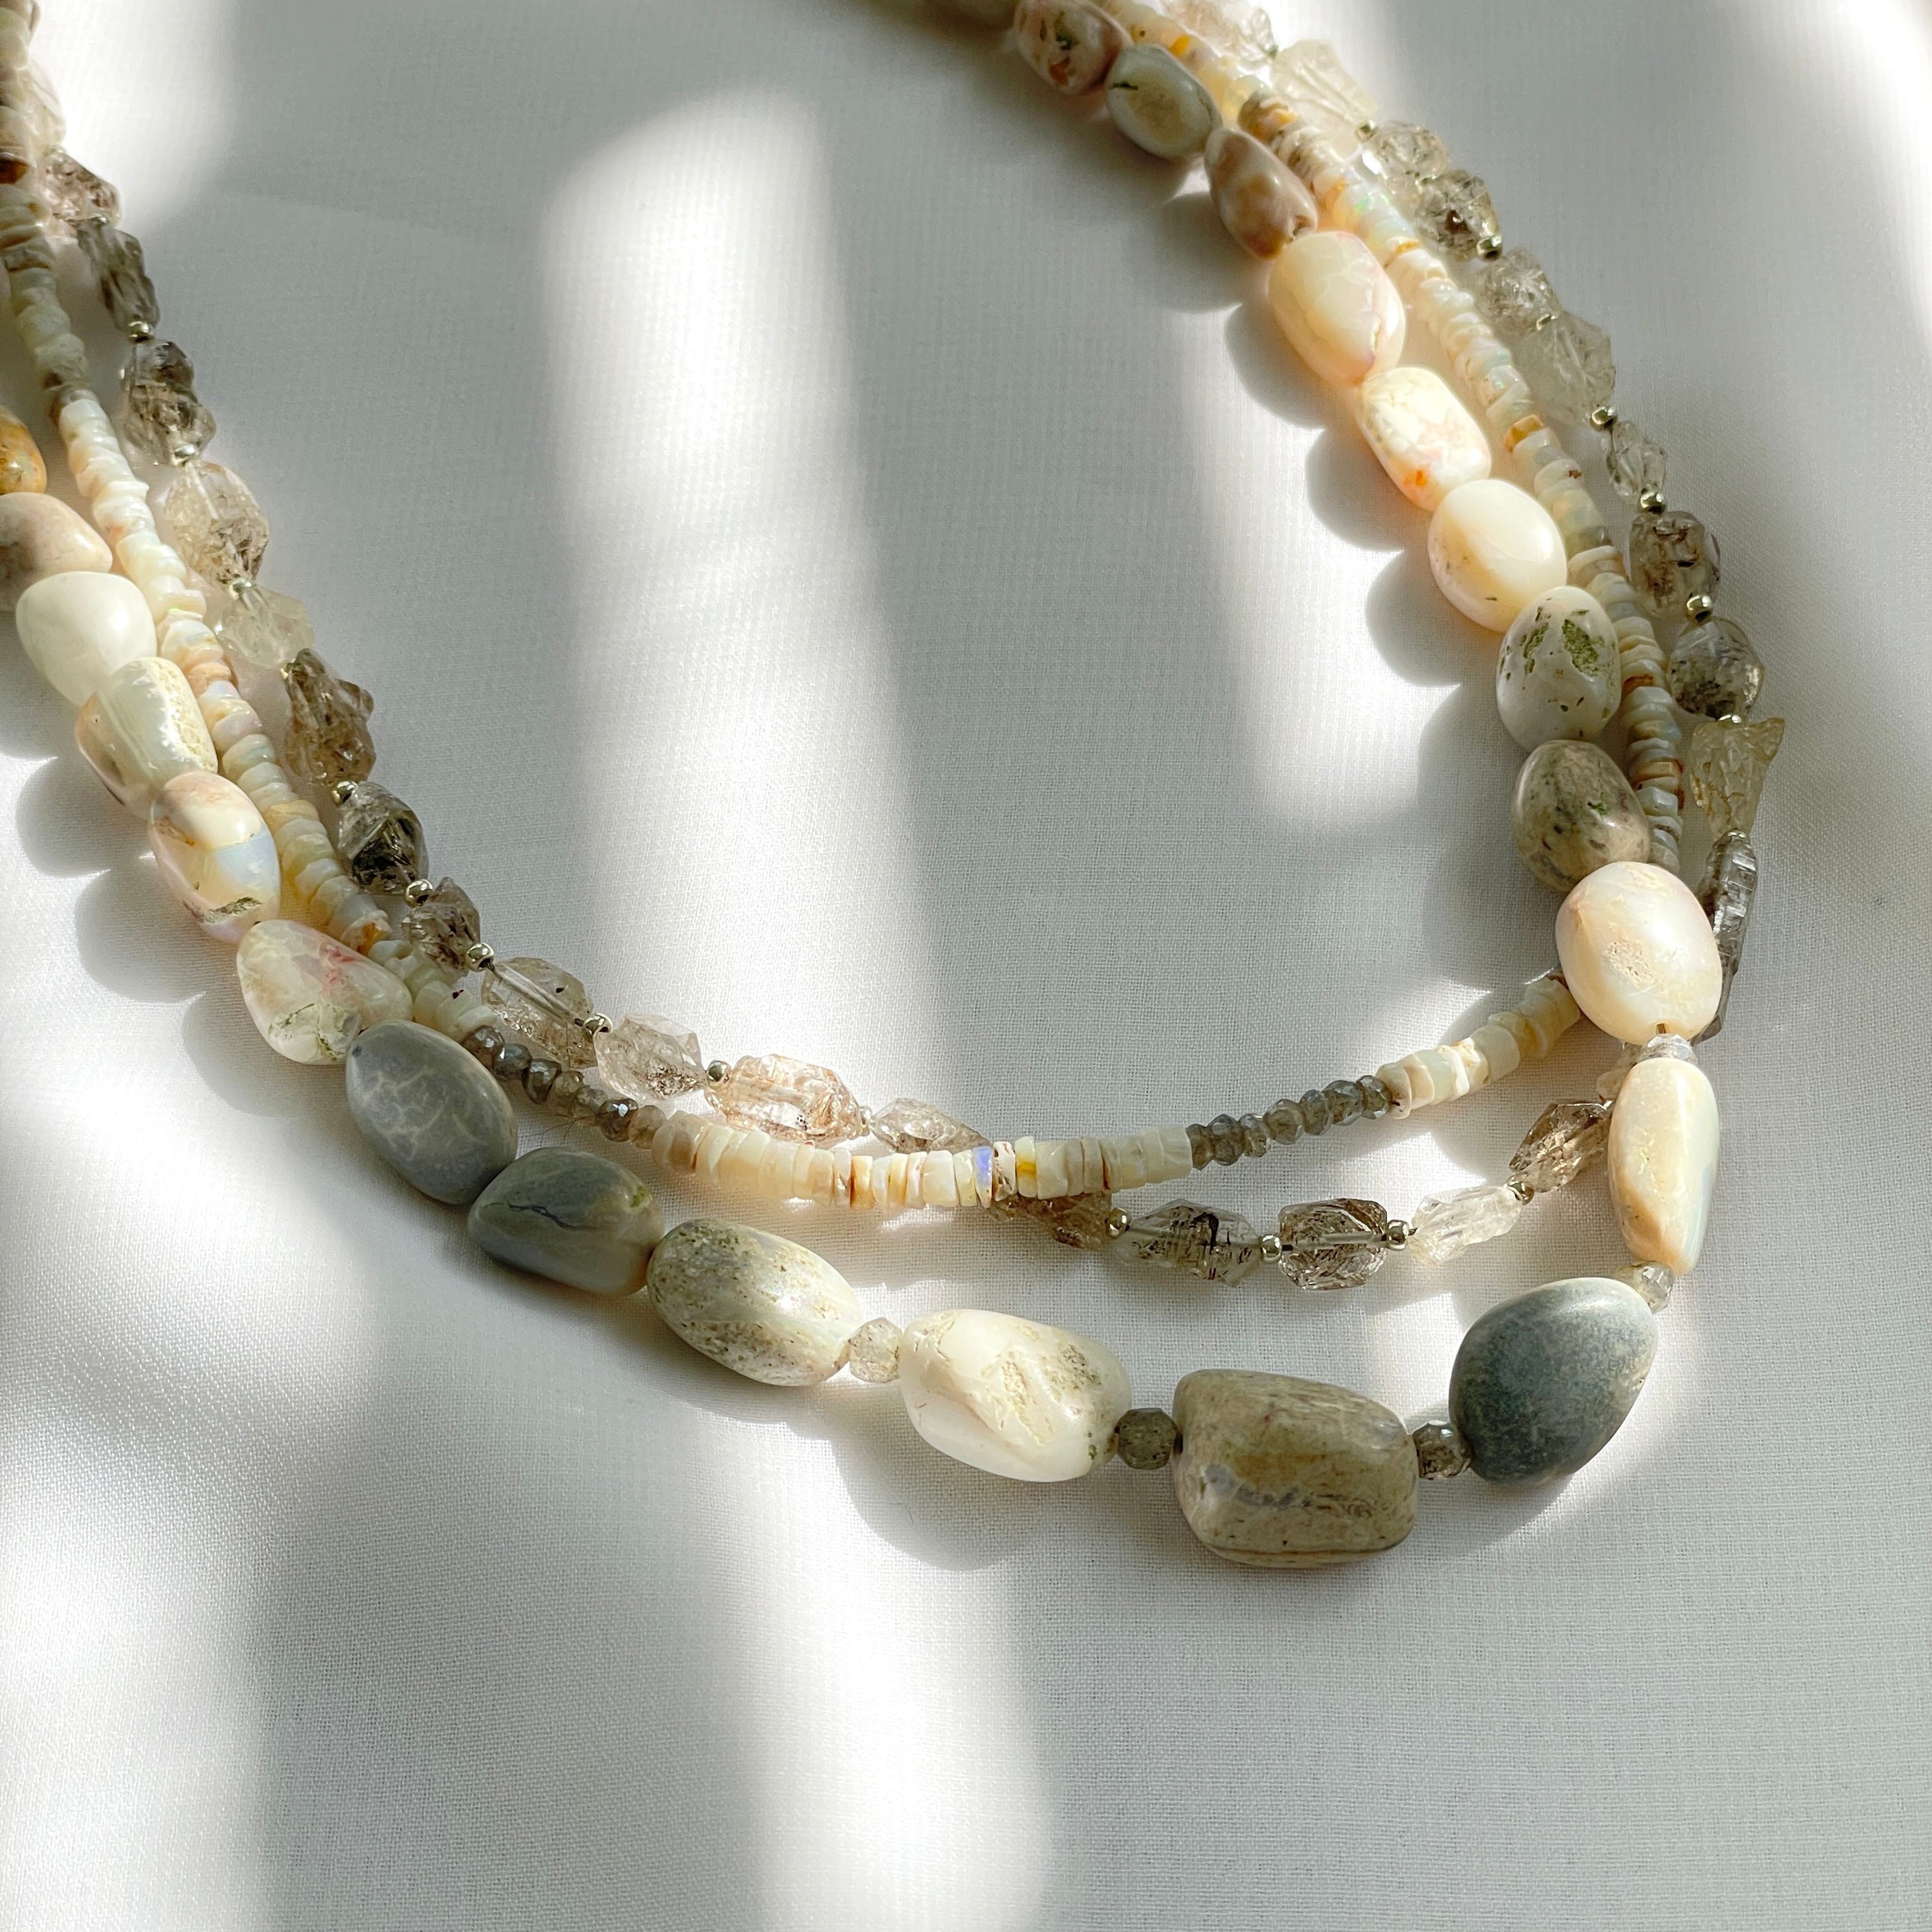 Opal Delight Necklace